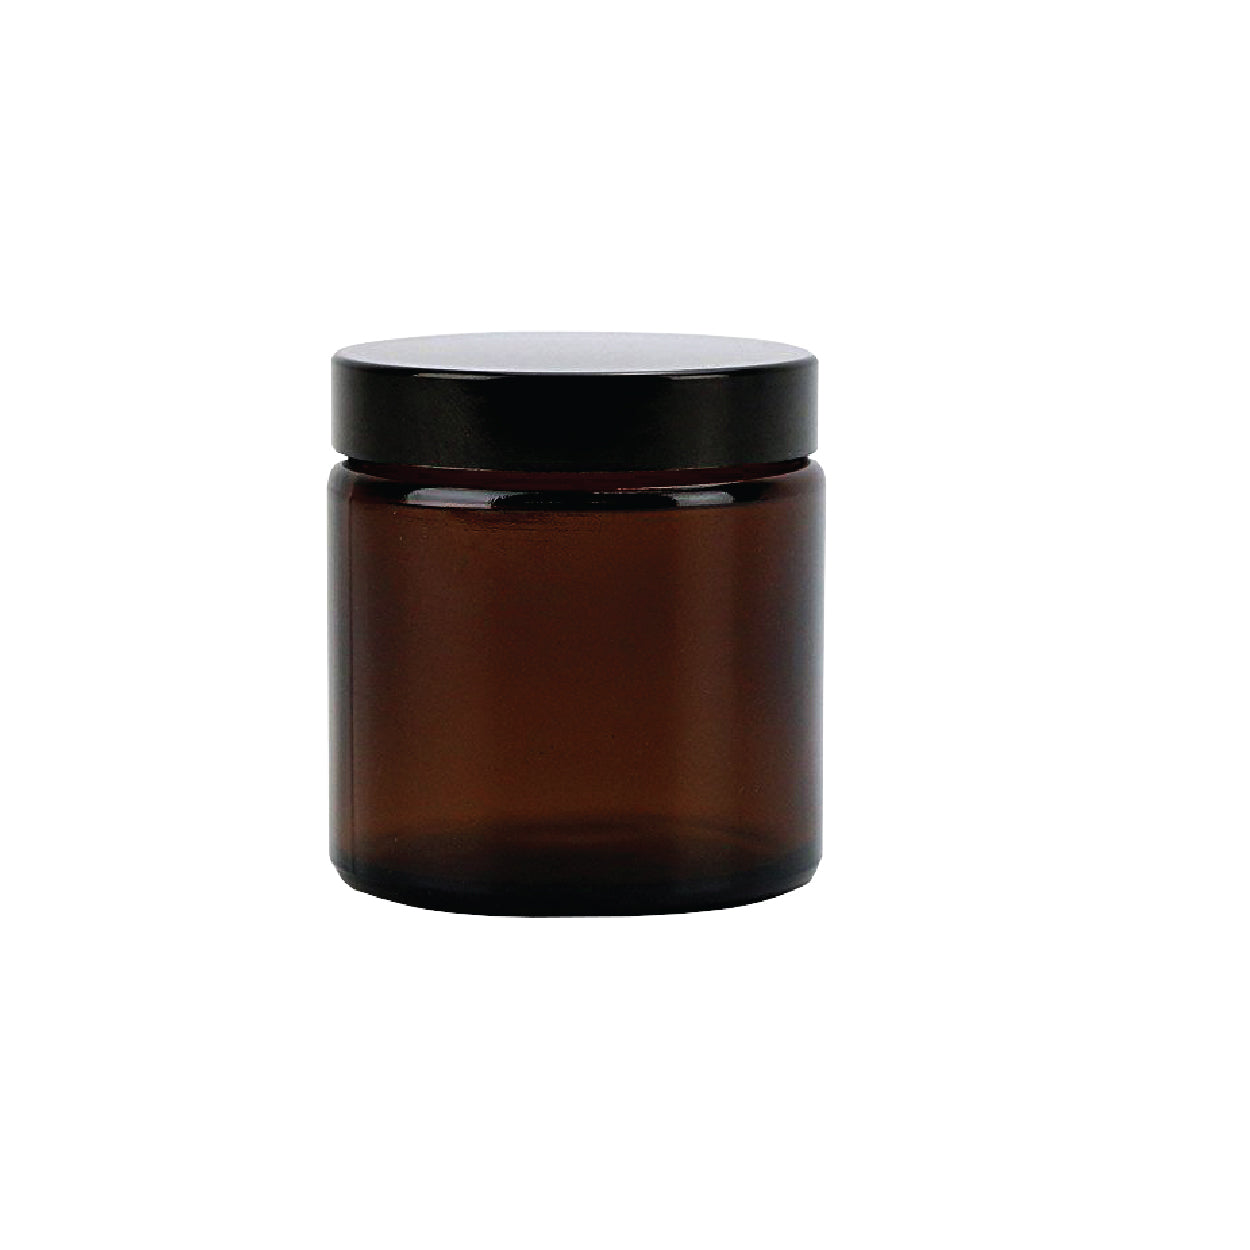 100ml Glass Amber Cosmetic Jar Brown with Black Srew Lid WD0100.A